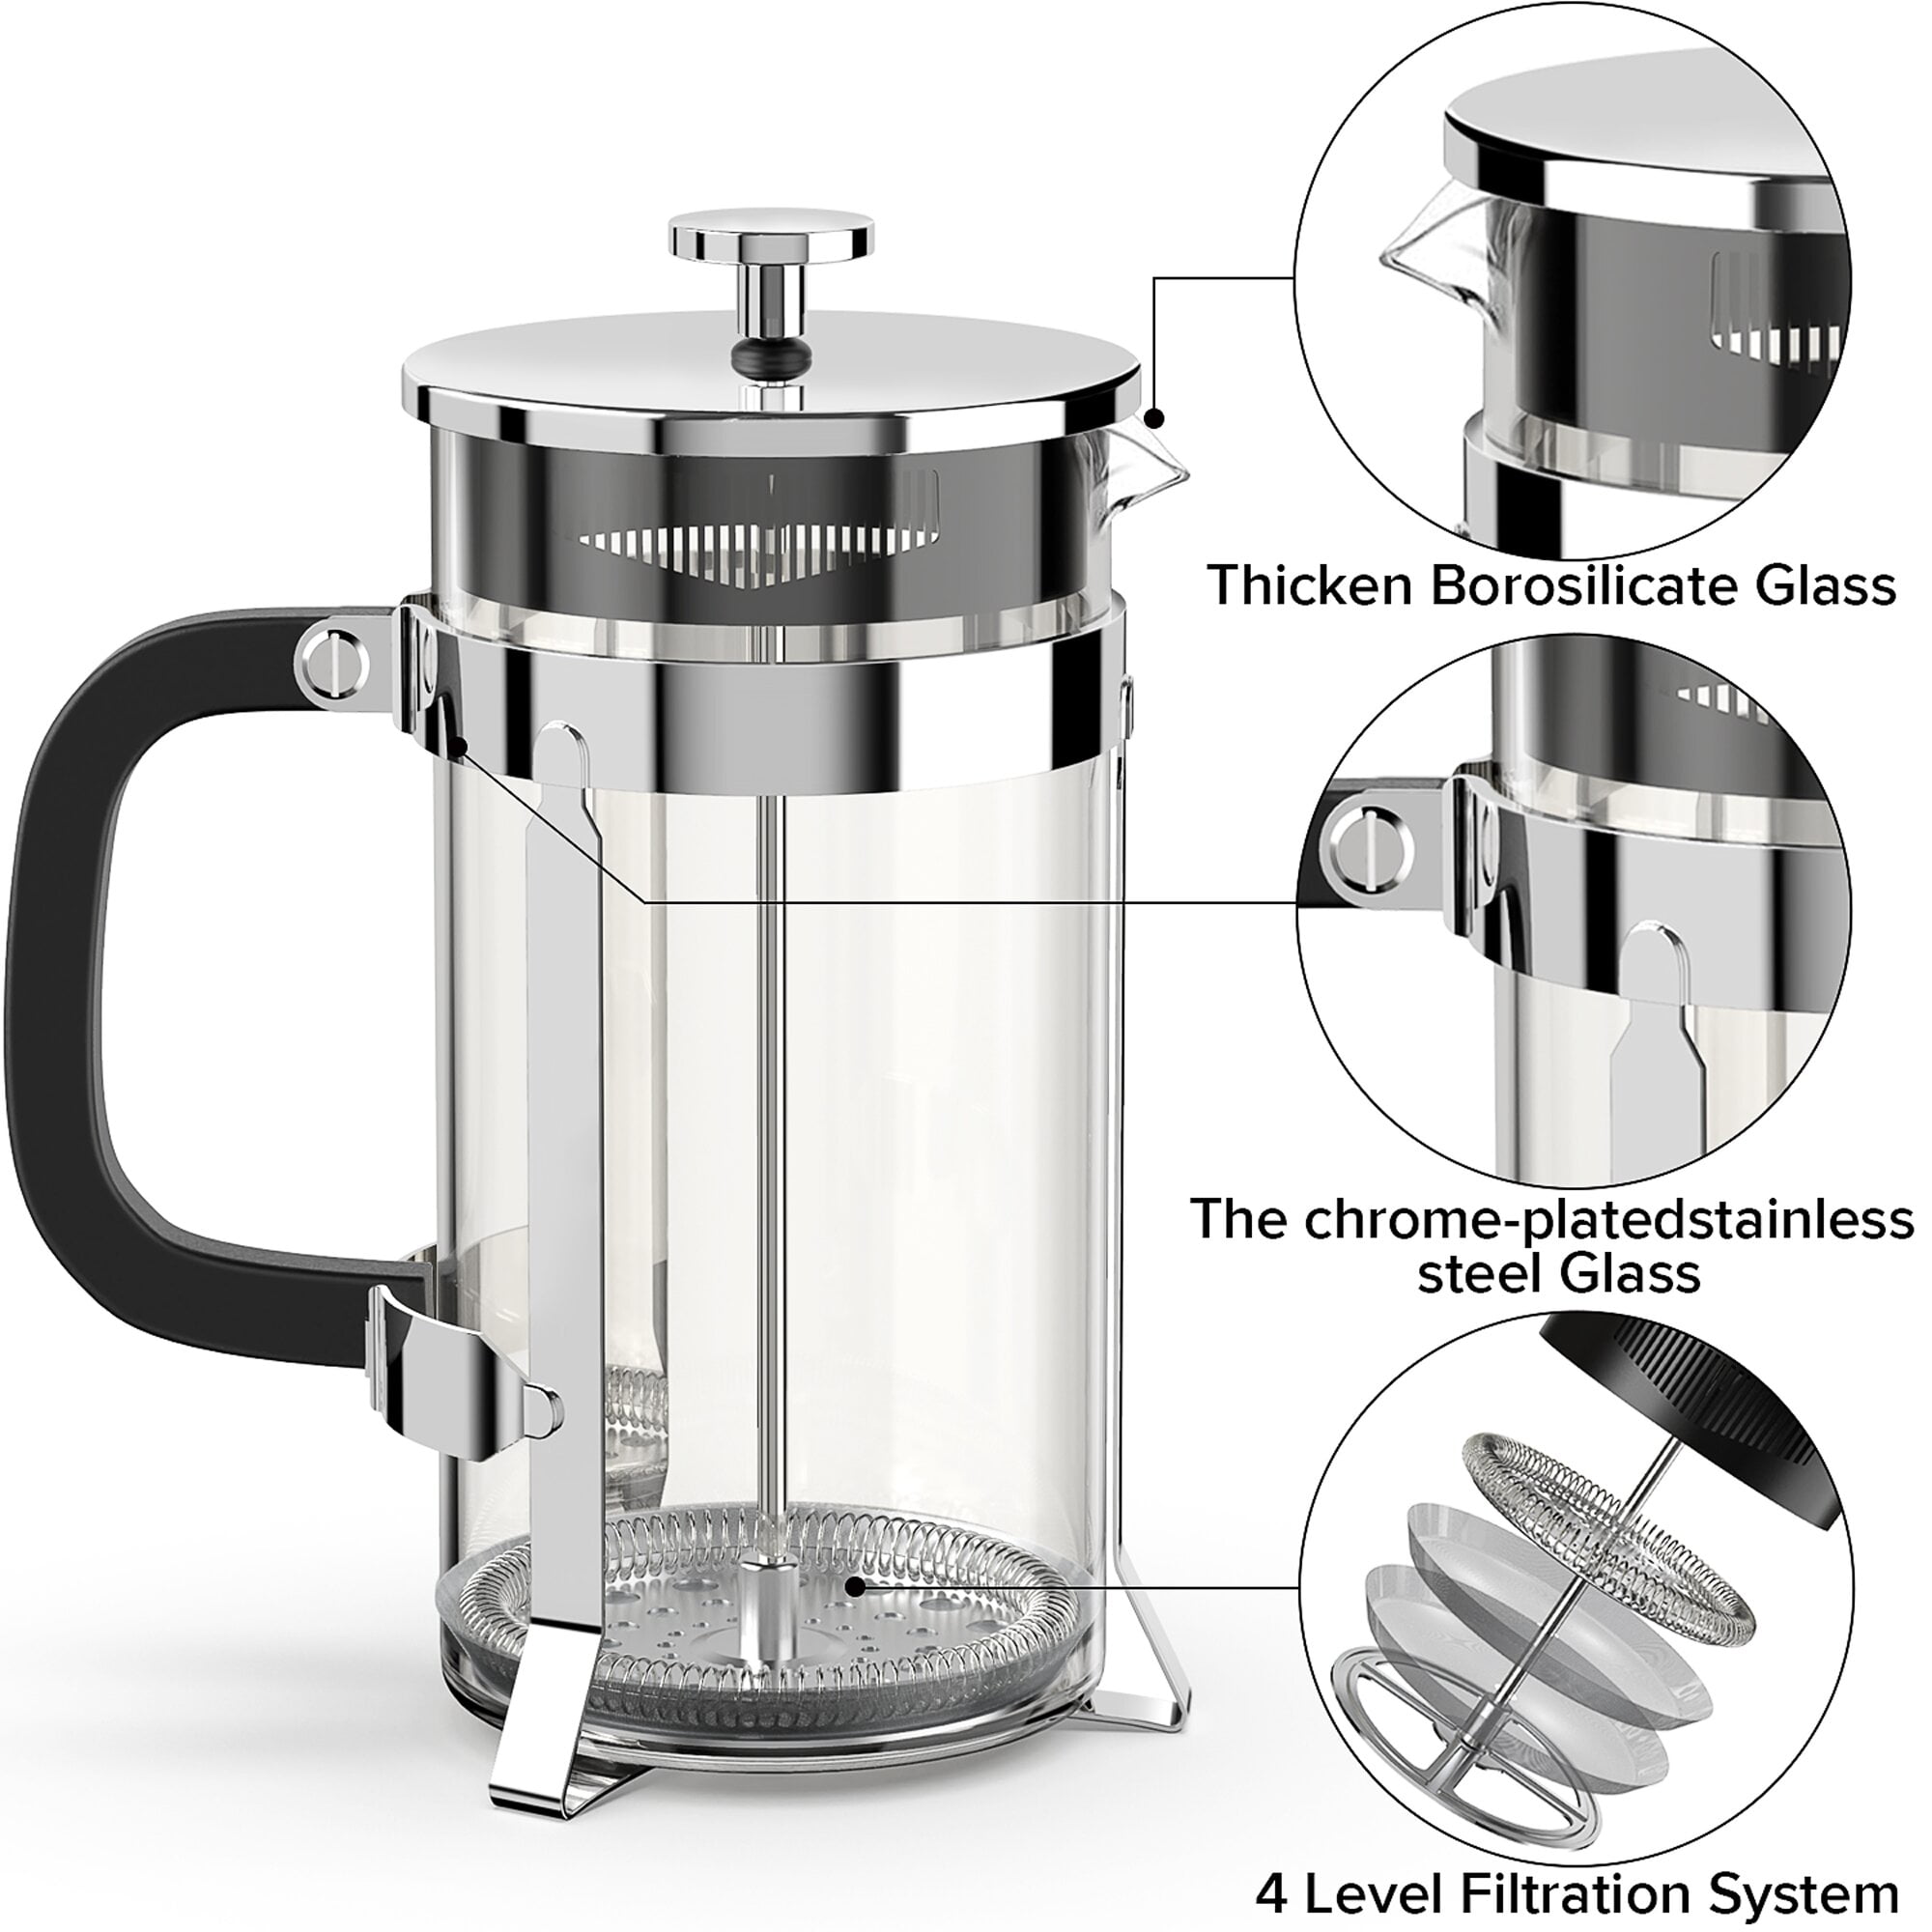 French Press Coffee Maker – Black Beverages